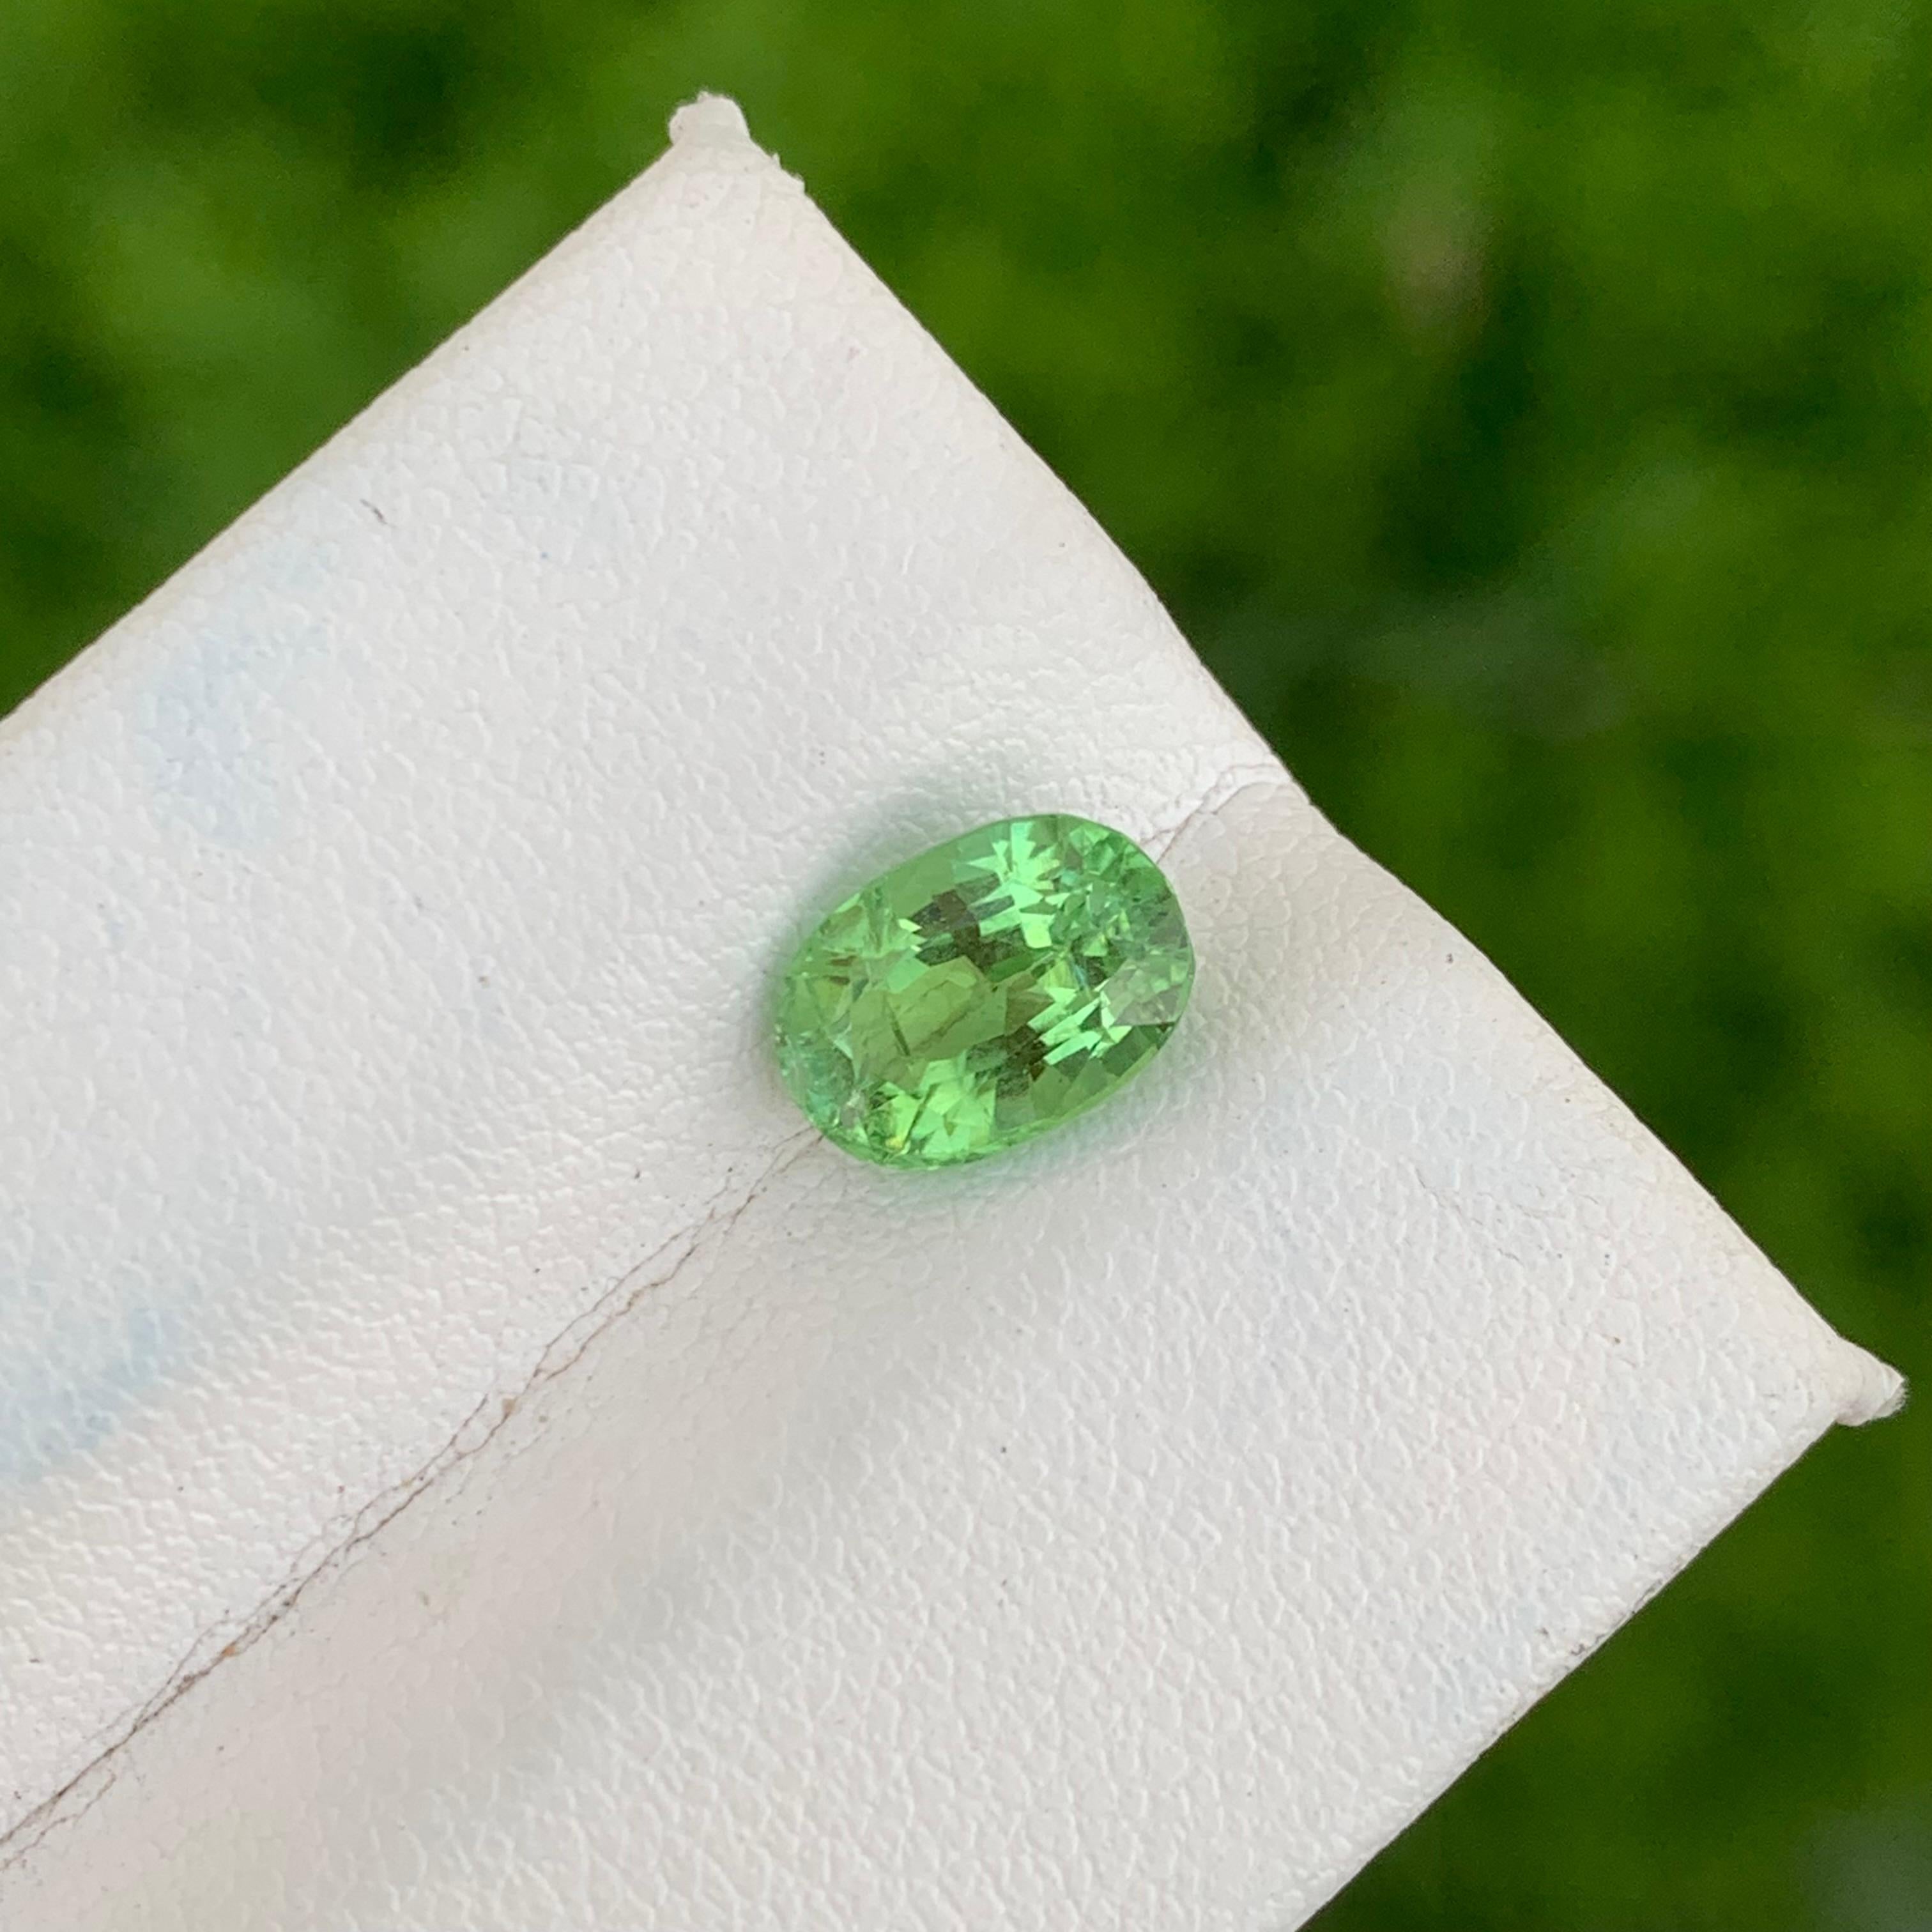 Loose Tourmaline 
Weight: 1.65 Carats 
Dimension: 8.1x5.9x4.7 Mm
Origin: Kunar Afghanistan 
Shape: Oval
Color: Mint Green
Treatment: Non
Certificate: On Demand
Mint green tourmaline, a captivating variety of tourmaline, is celebrated for its